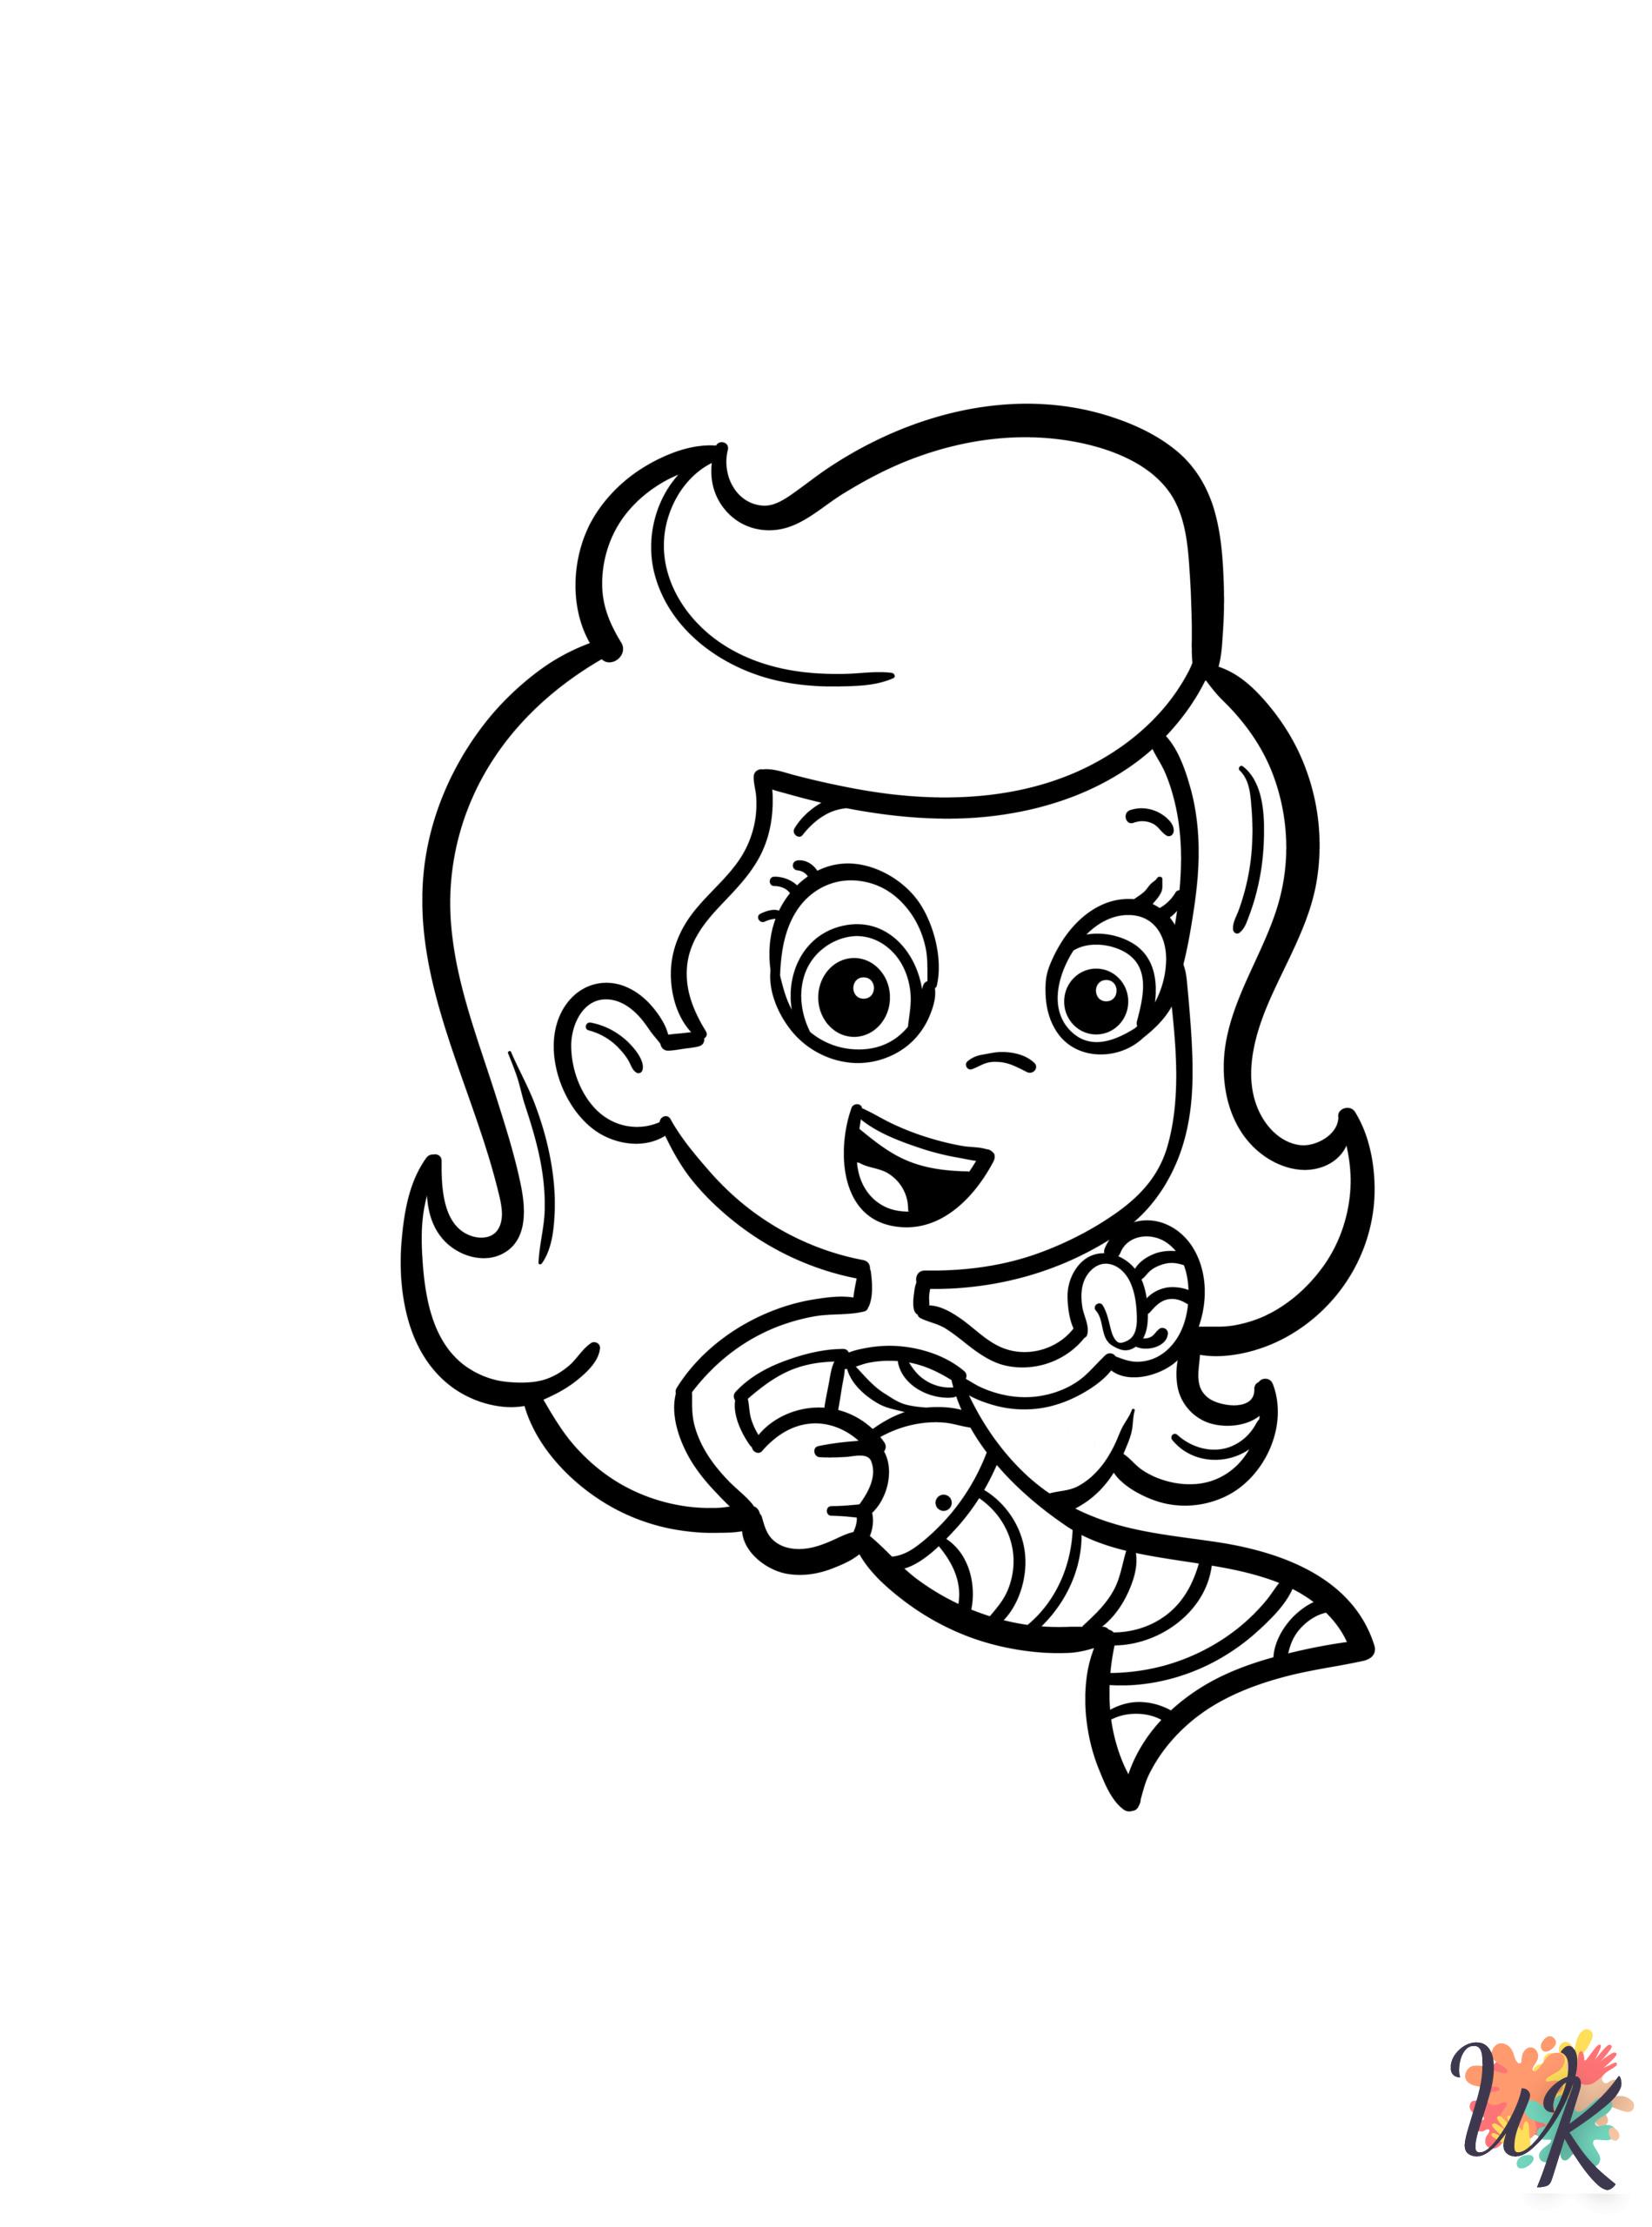 hard Bubble Guppies coloring pages